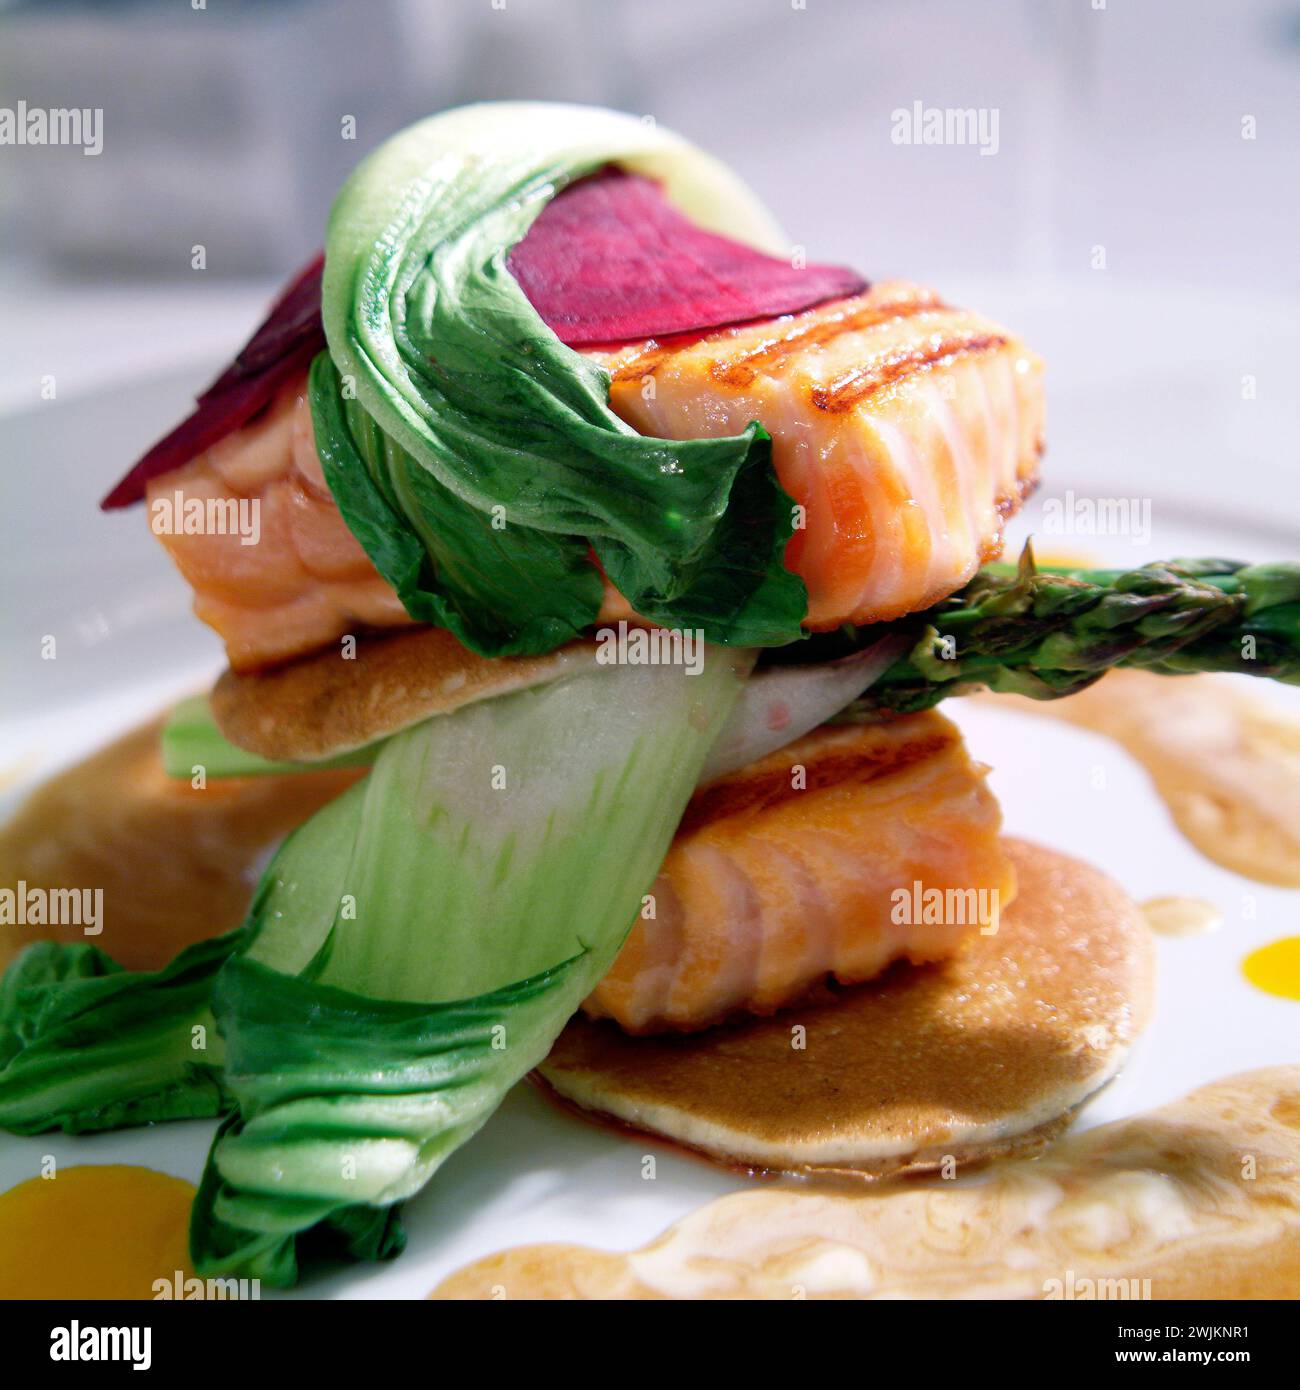 A plate of food with a piece of food on it Stock Photo